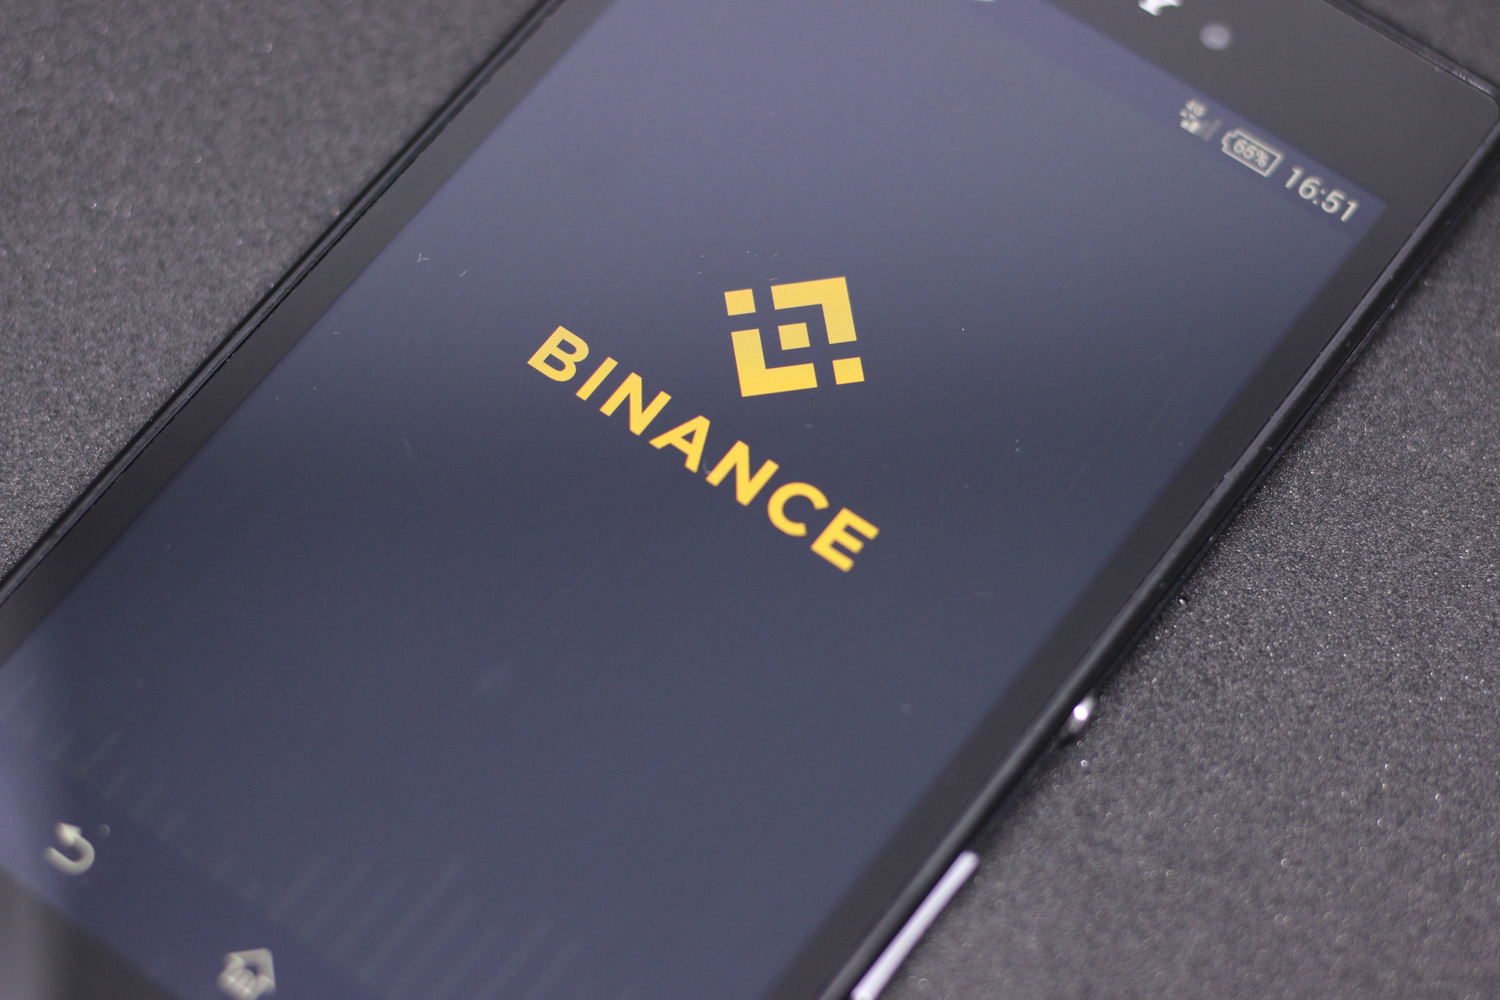 Binance Exchange Will List Circle’s USDC Stablecoin This Week